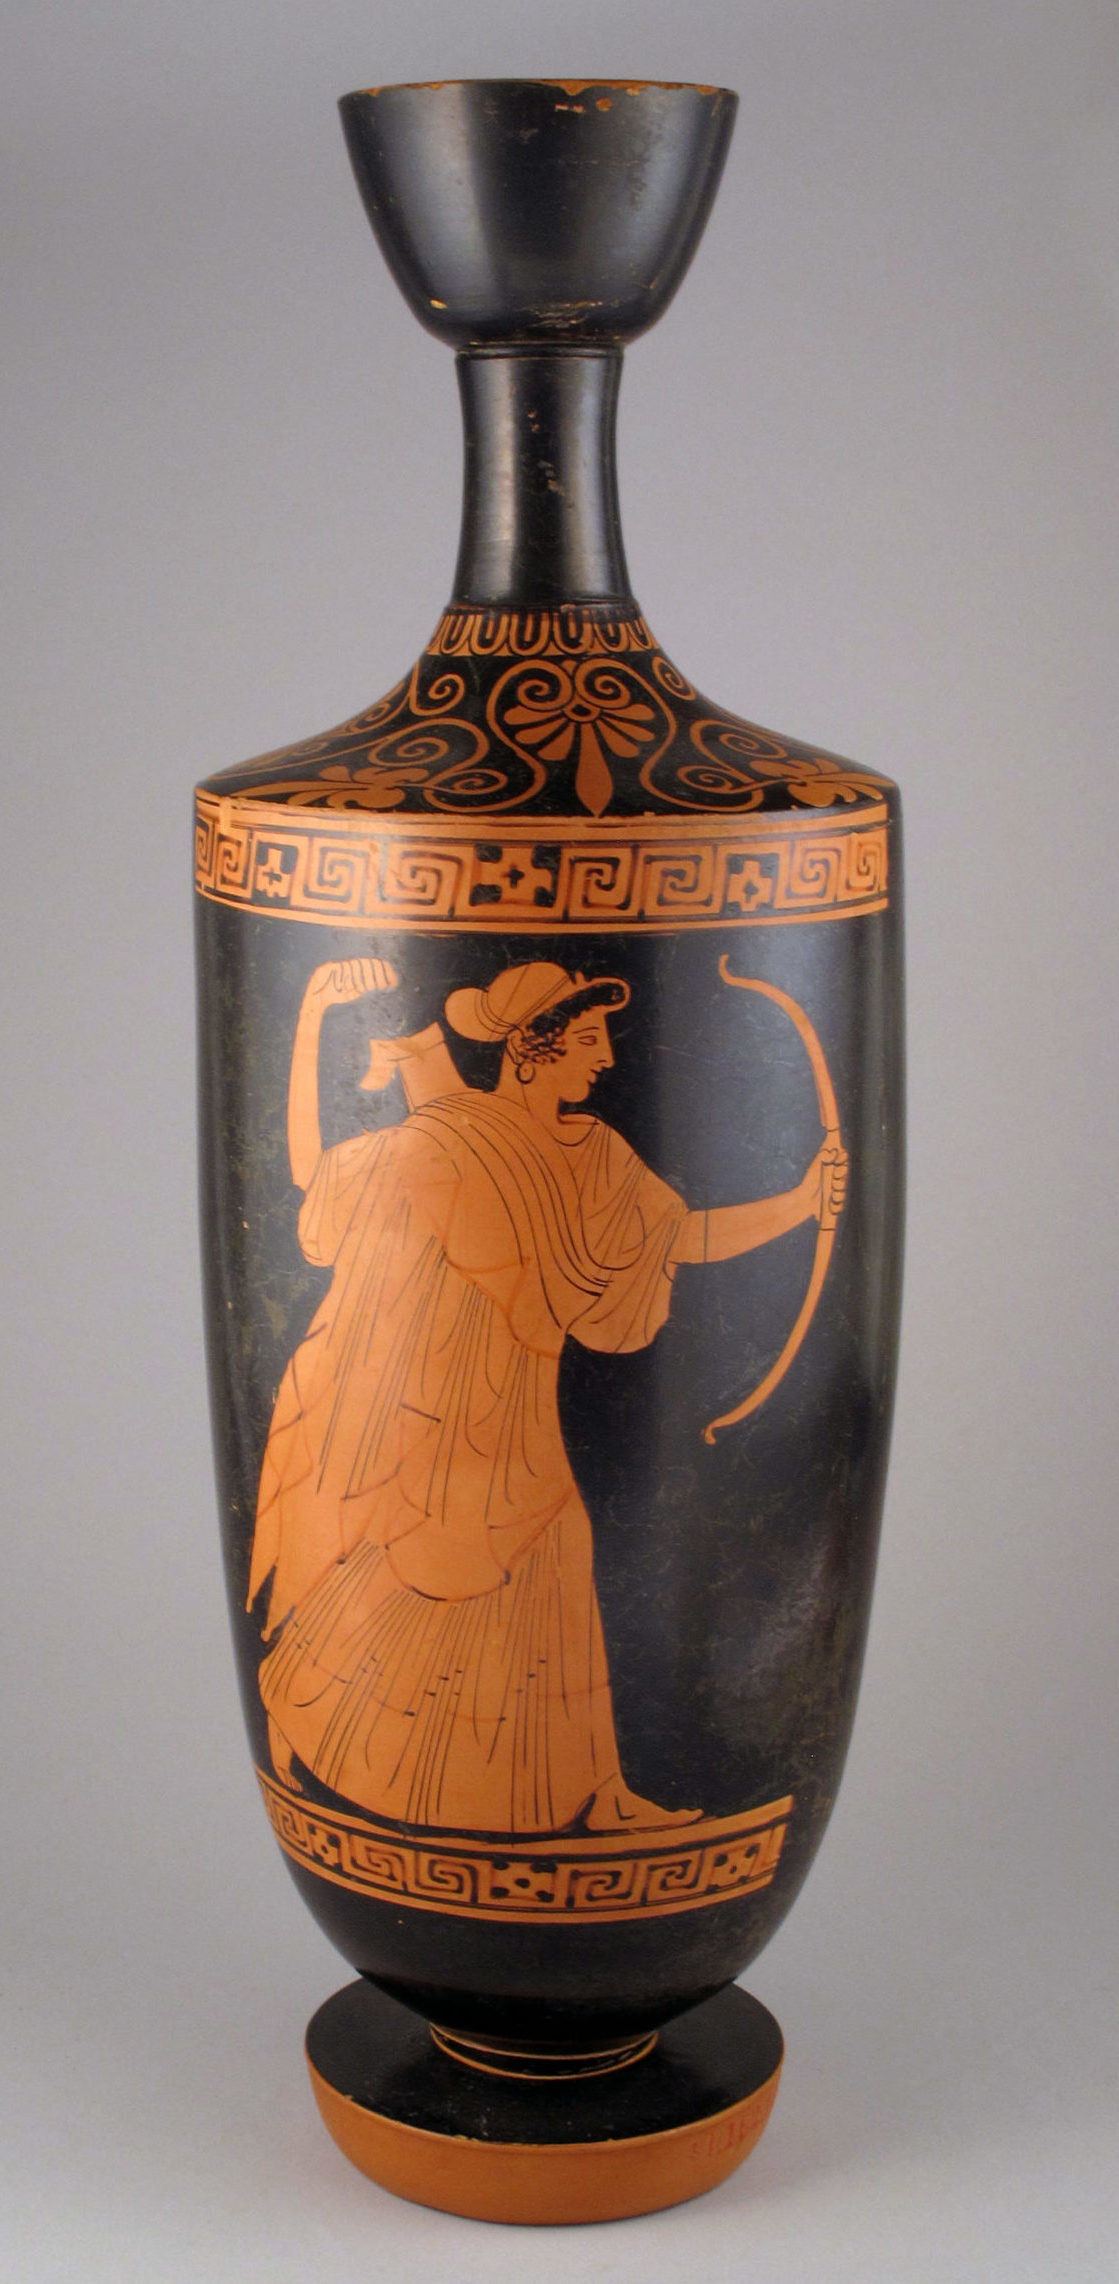 Artemis striding forward holding a bow in one hand and drawing an arrow from a quiver on her back.